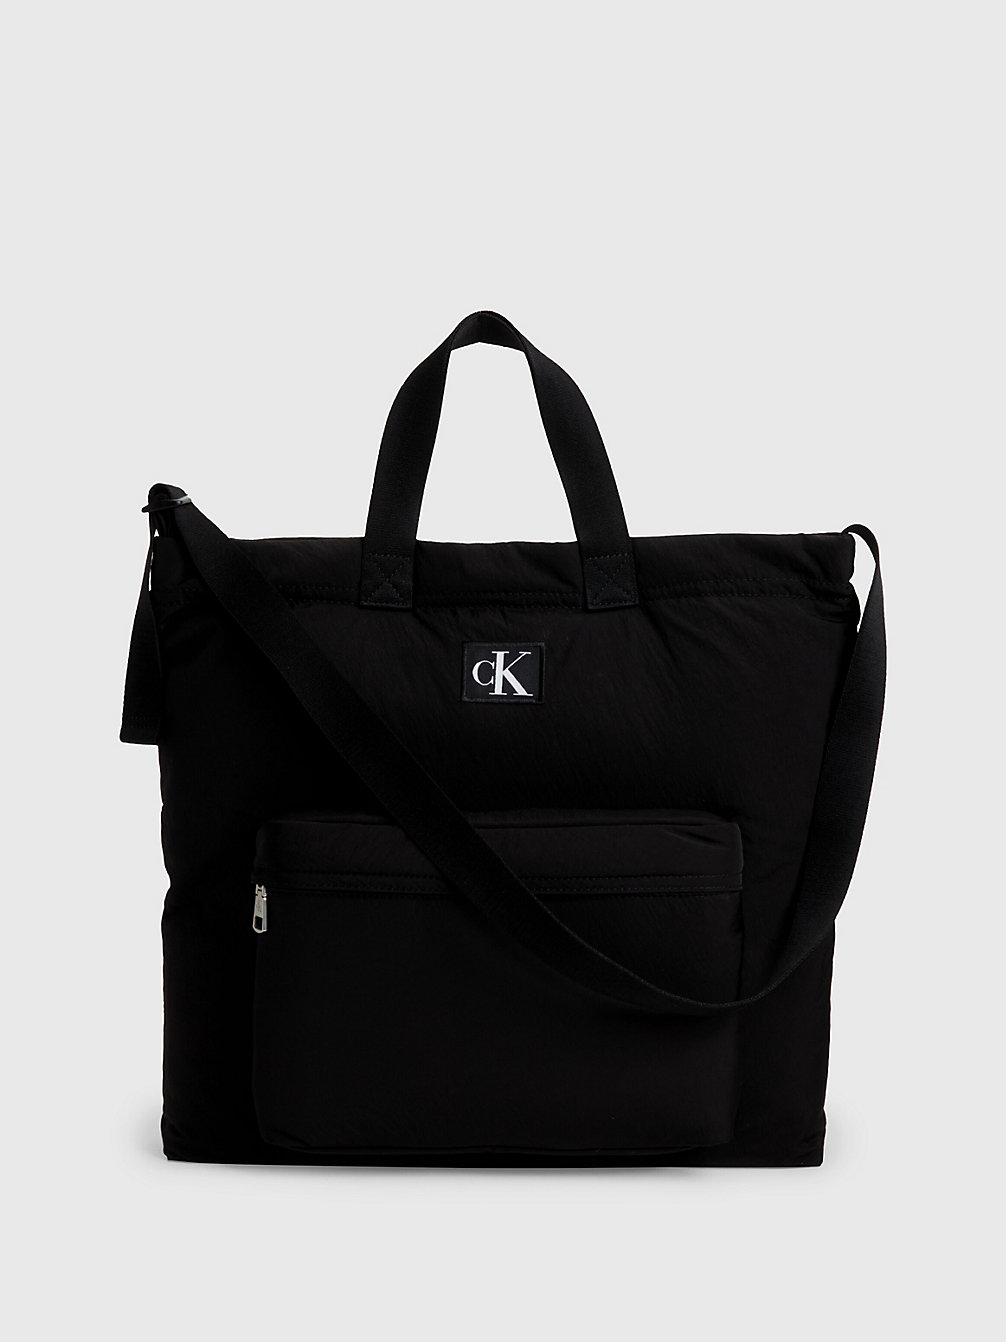 BLACK Soft Recycled Tote Bag undefined women Calvin Klein